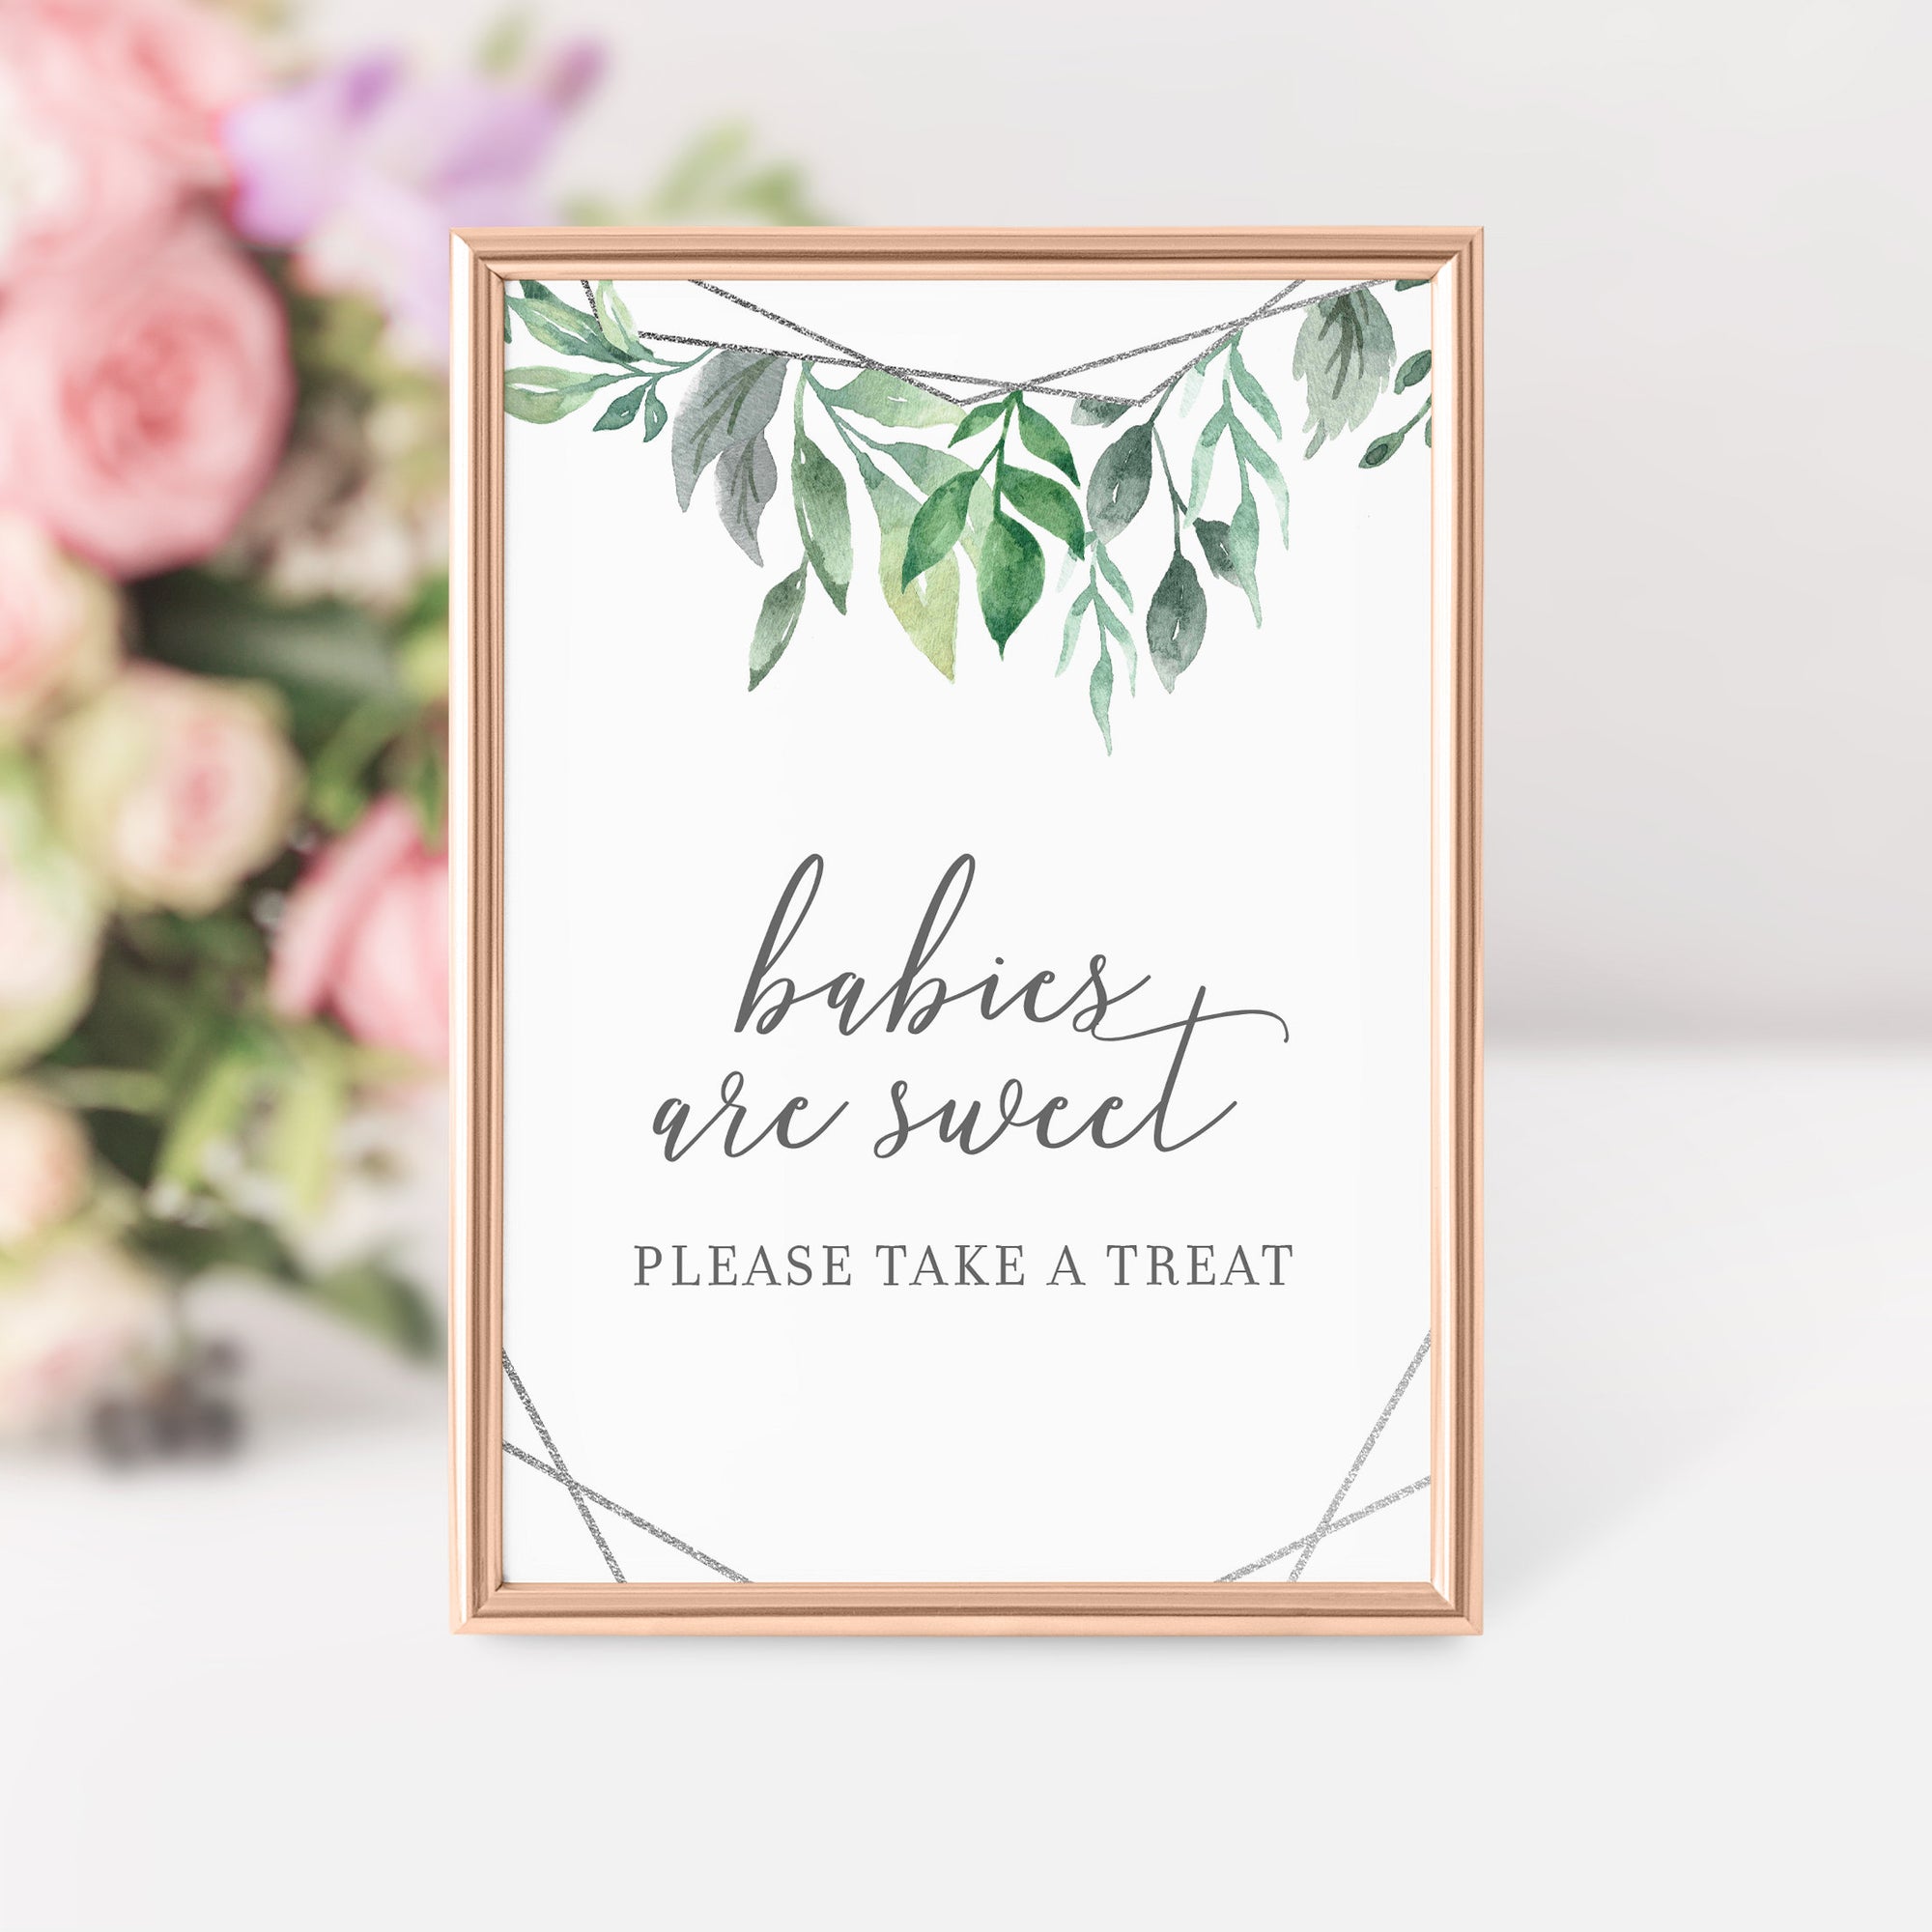 Geometric Silver Greenery Printable Treat Sign, INSTANT DOWNLOAD, Baby Shower Decorations, Sip and See Babies Are Sweet Dessert - GFS100 - @PlumPolkaDot 